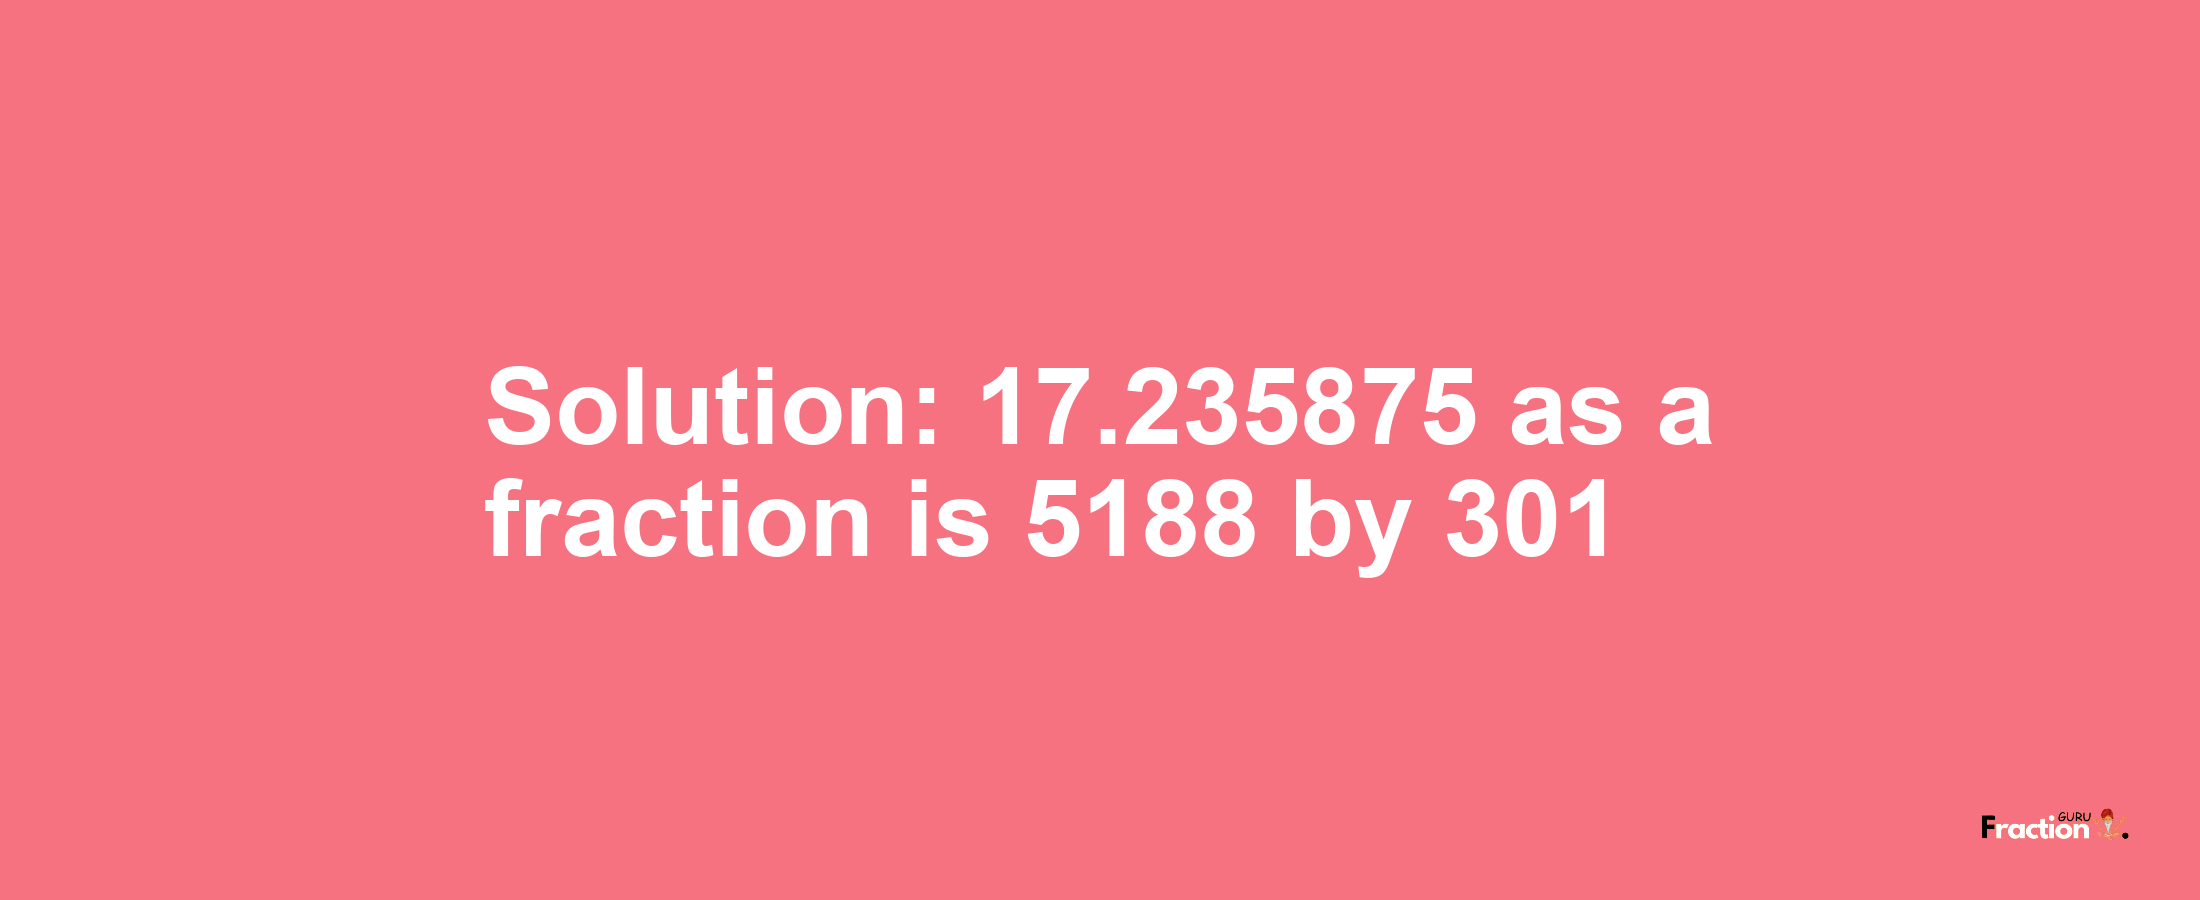 Solution:17.235875 as a fraction is 5188/301